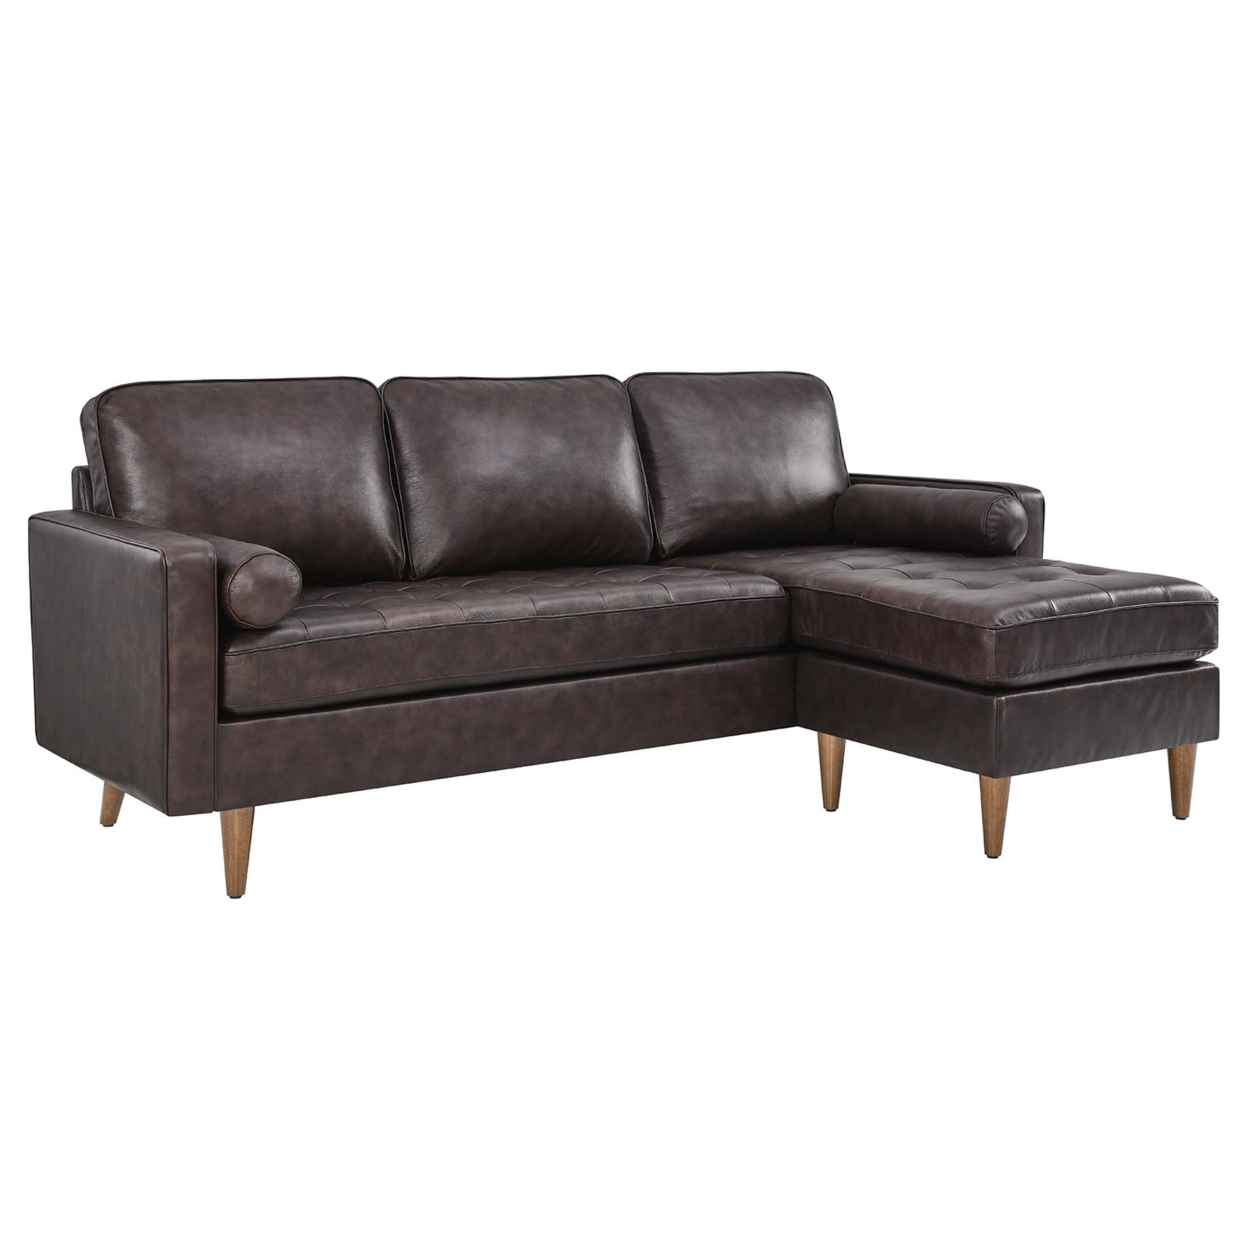 Valour 78 Leather Apartment Sectional Sofa, Brown